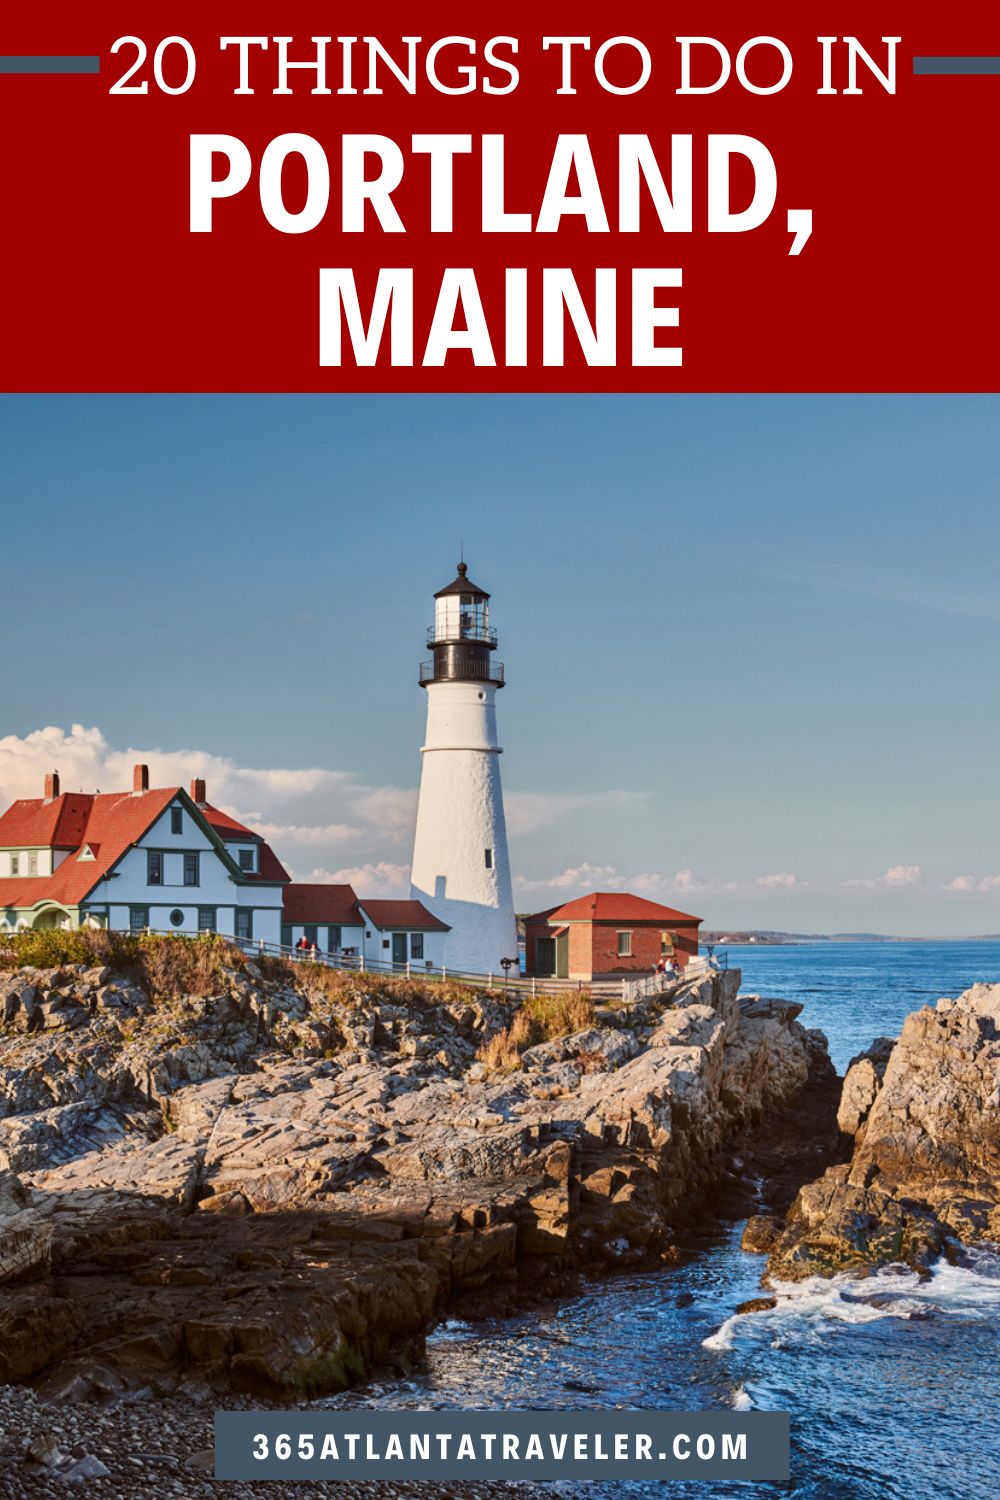 20 OUTSTANDING THINGS TO DO IN PORTLAND MAINE